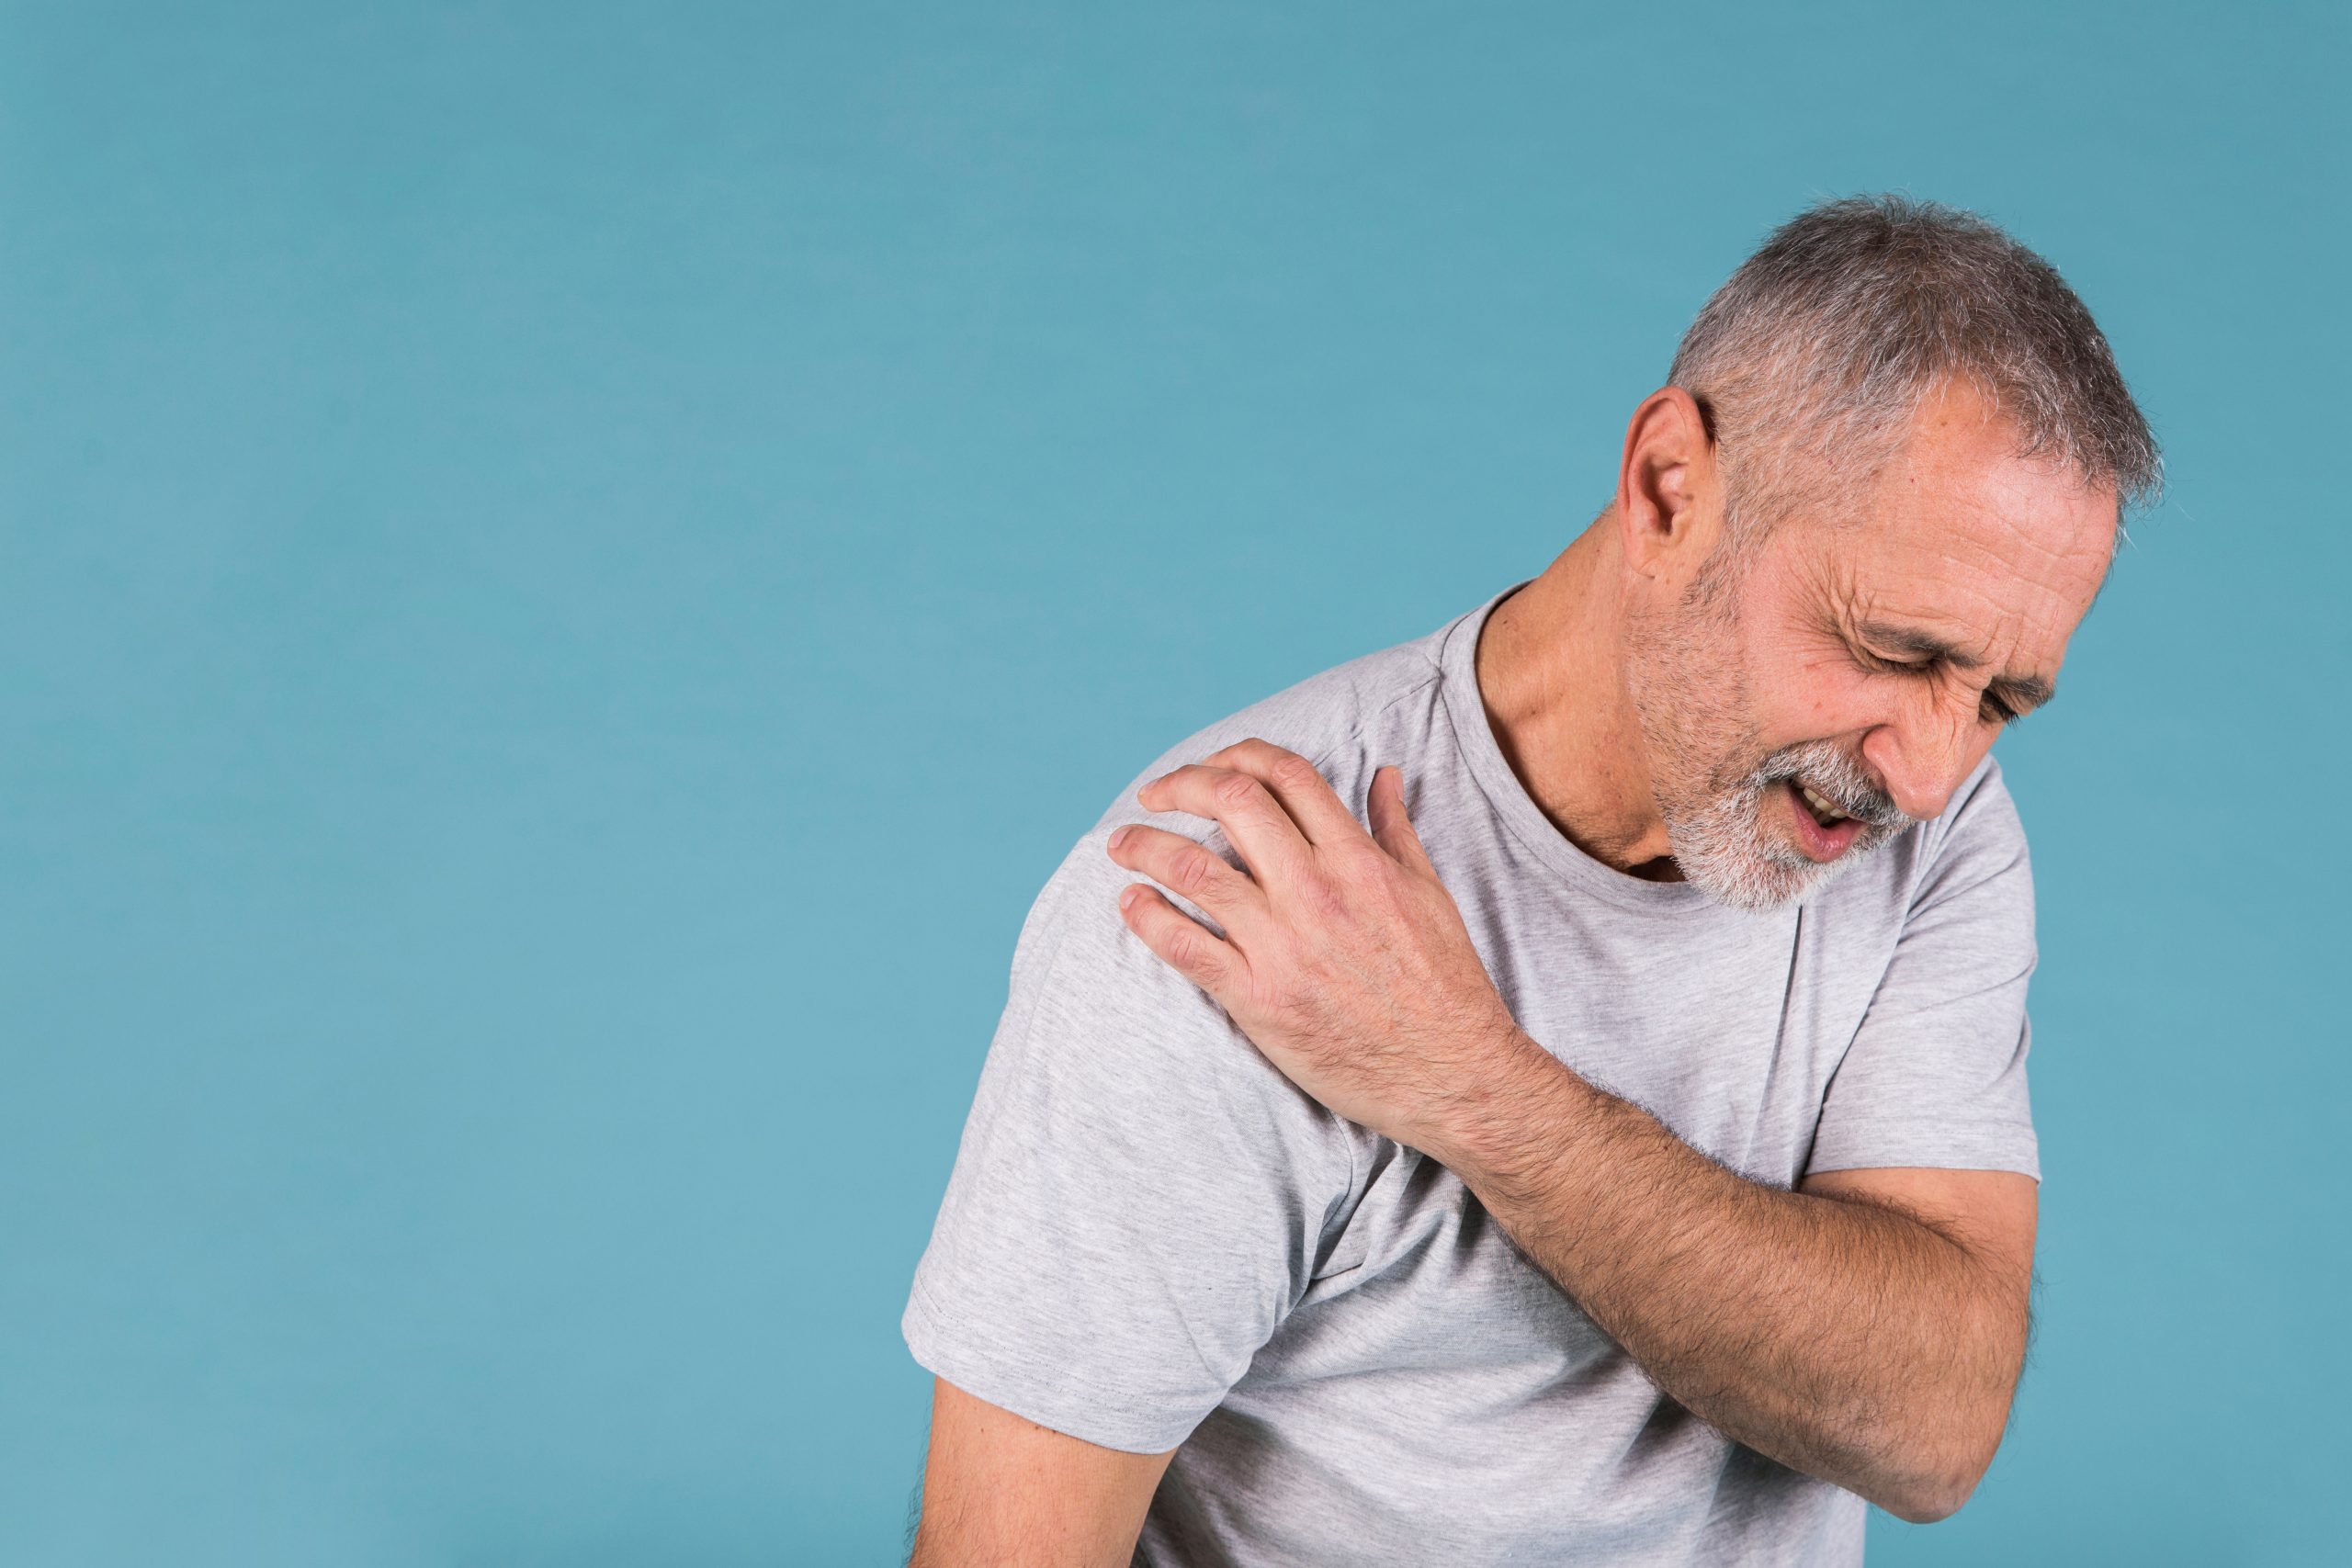 Suffering from joint pain? These underlying health conditions could be why